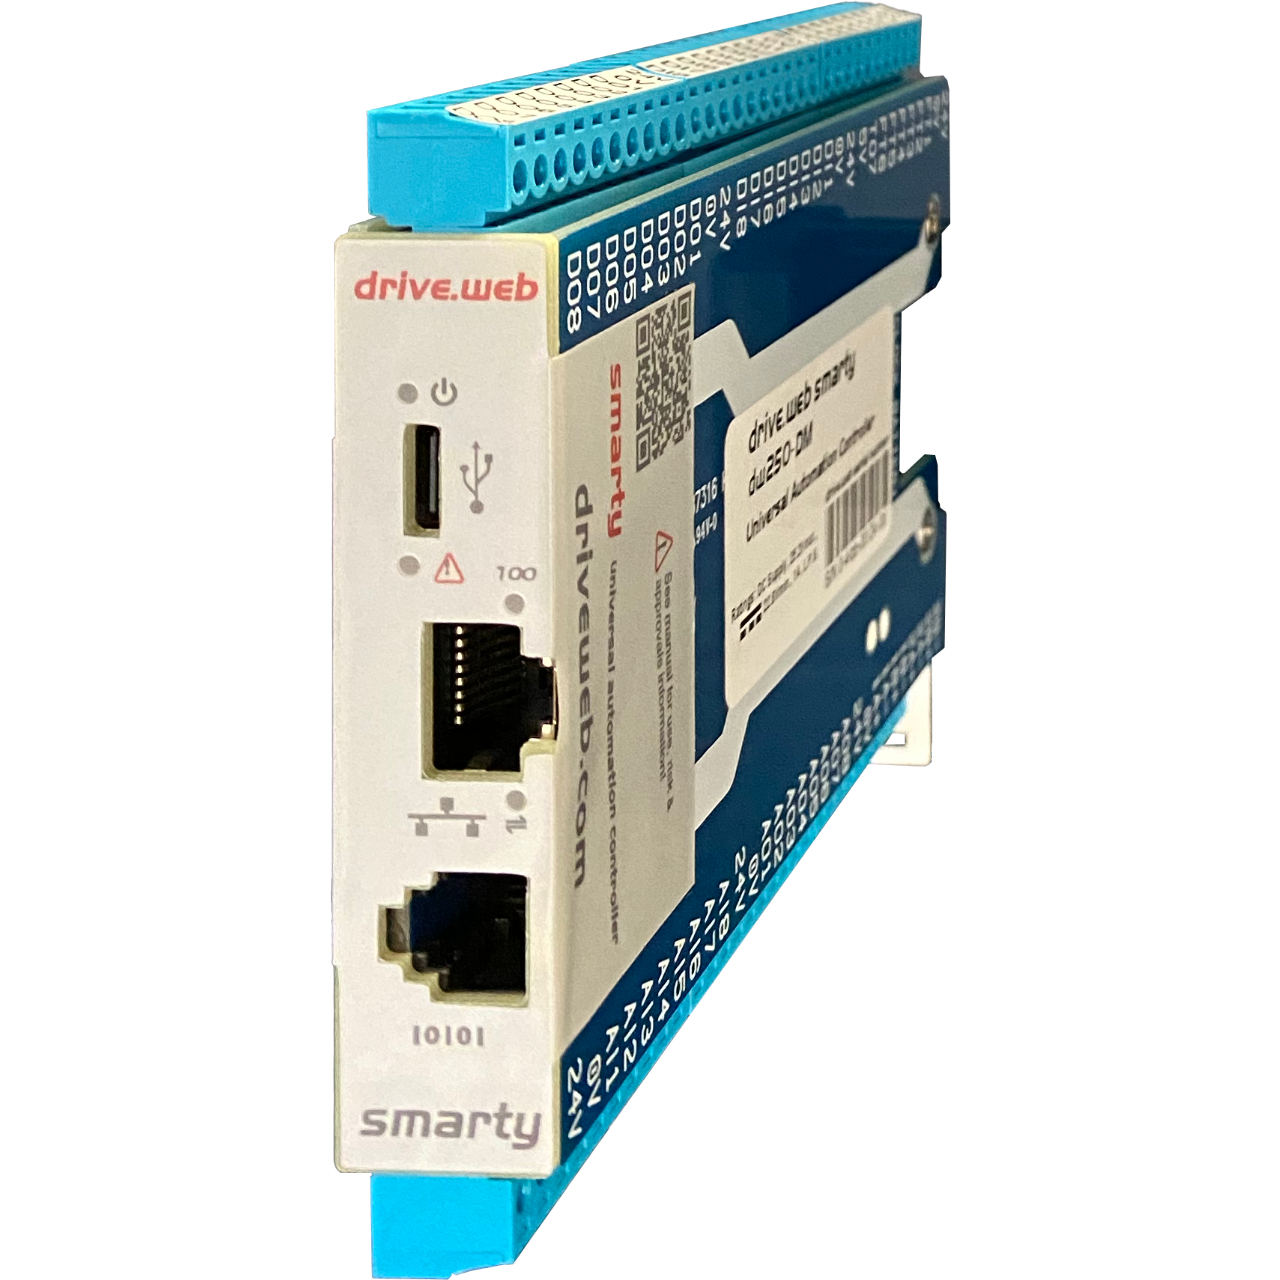 smarty7  Automation Controller, Ethernet and USB, Distributed Control, 32  I/O Points, 6x Frequency I/